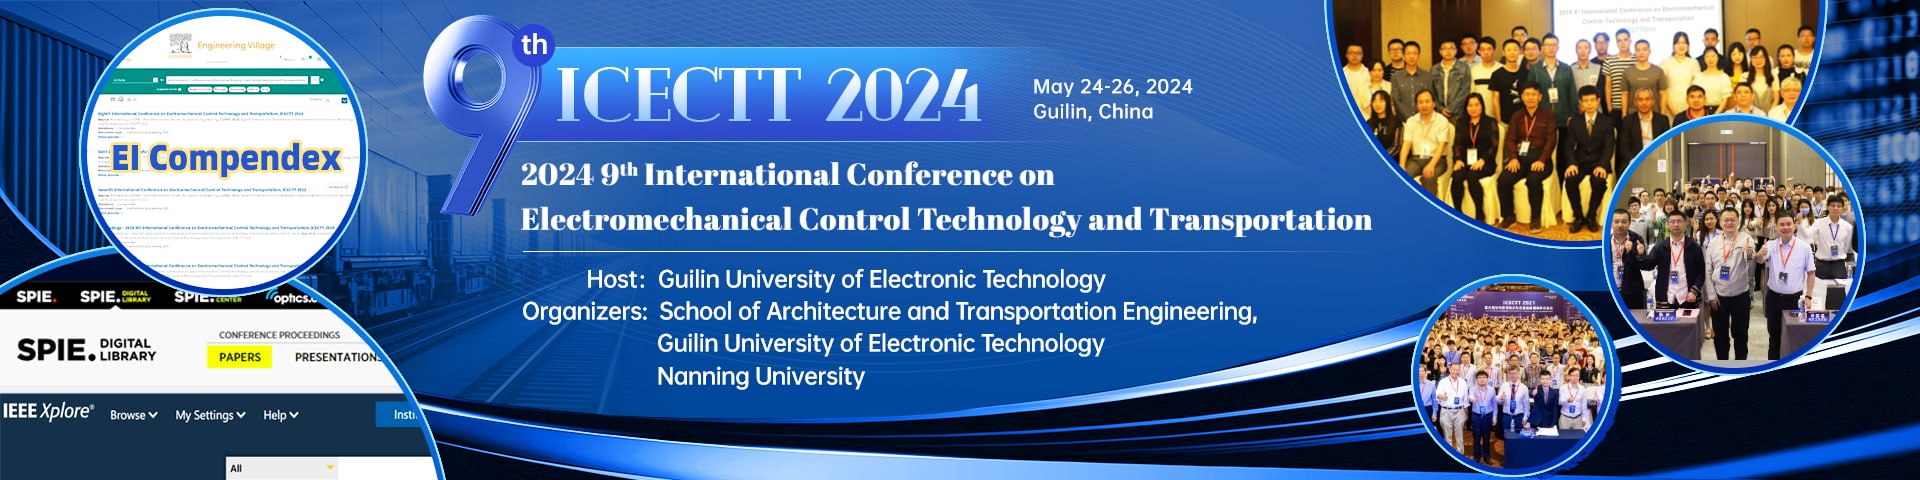 2024 9th International Conference on Electromechanical Control Technology and Transportation (ICECTT 2024)